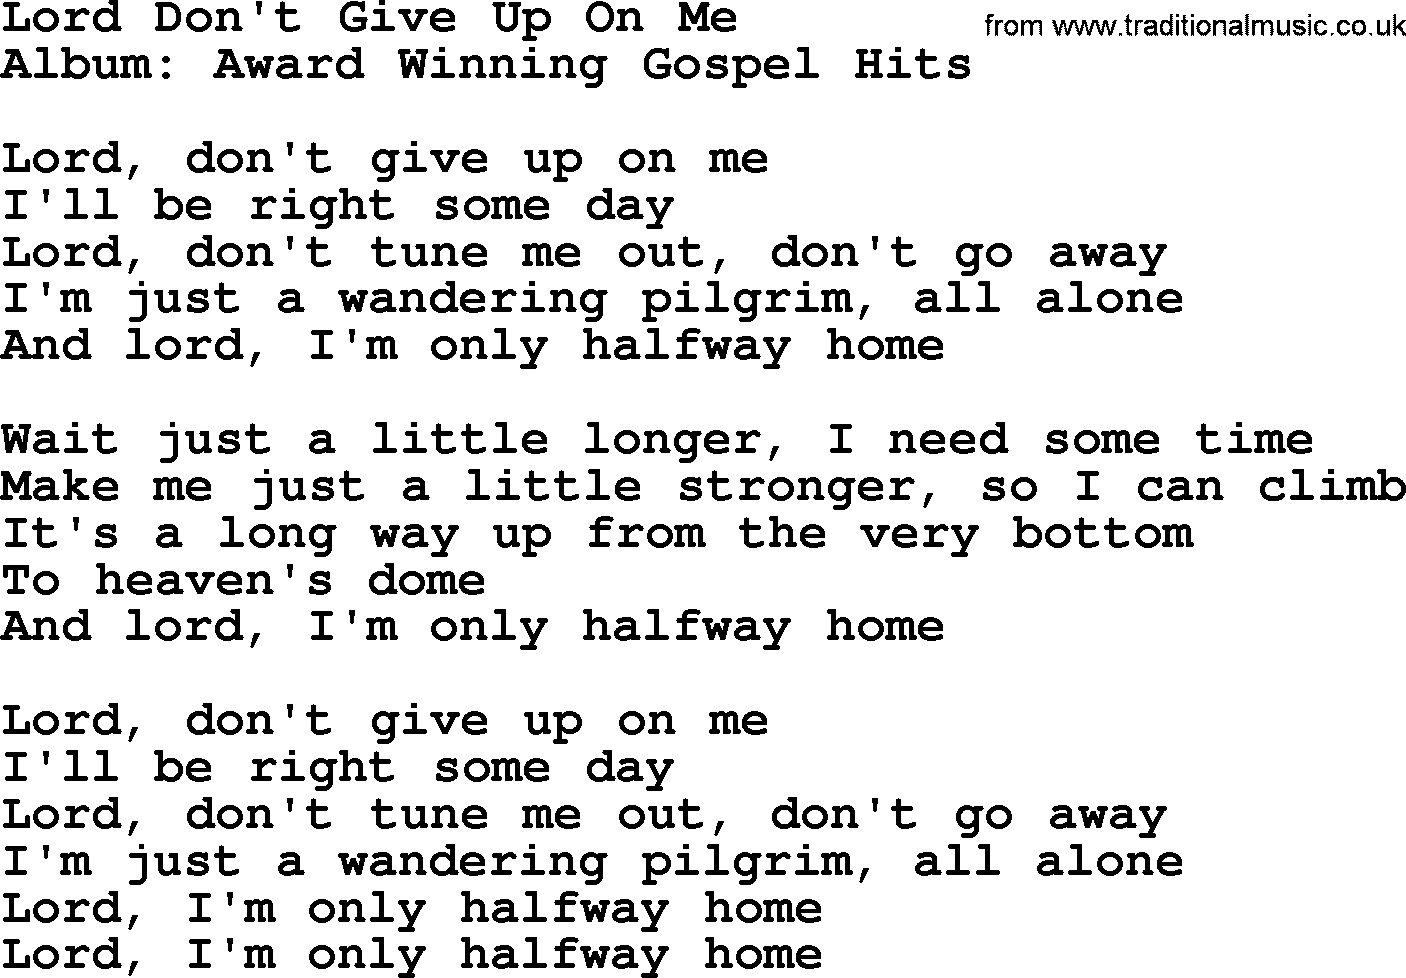 Merle Haggard song: Lord Don't Give Up On Me, lyrics.